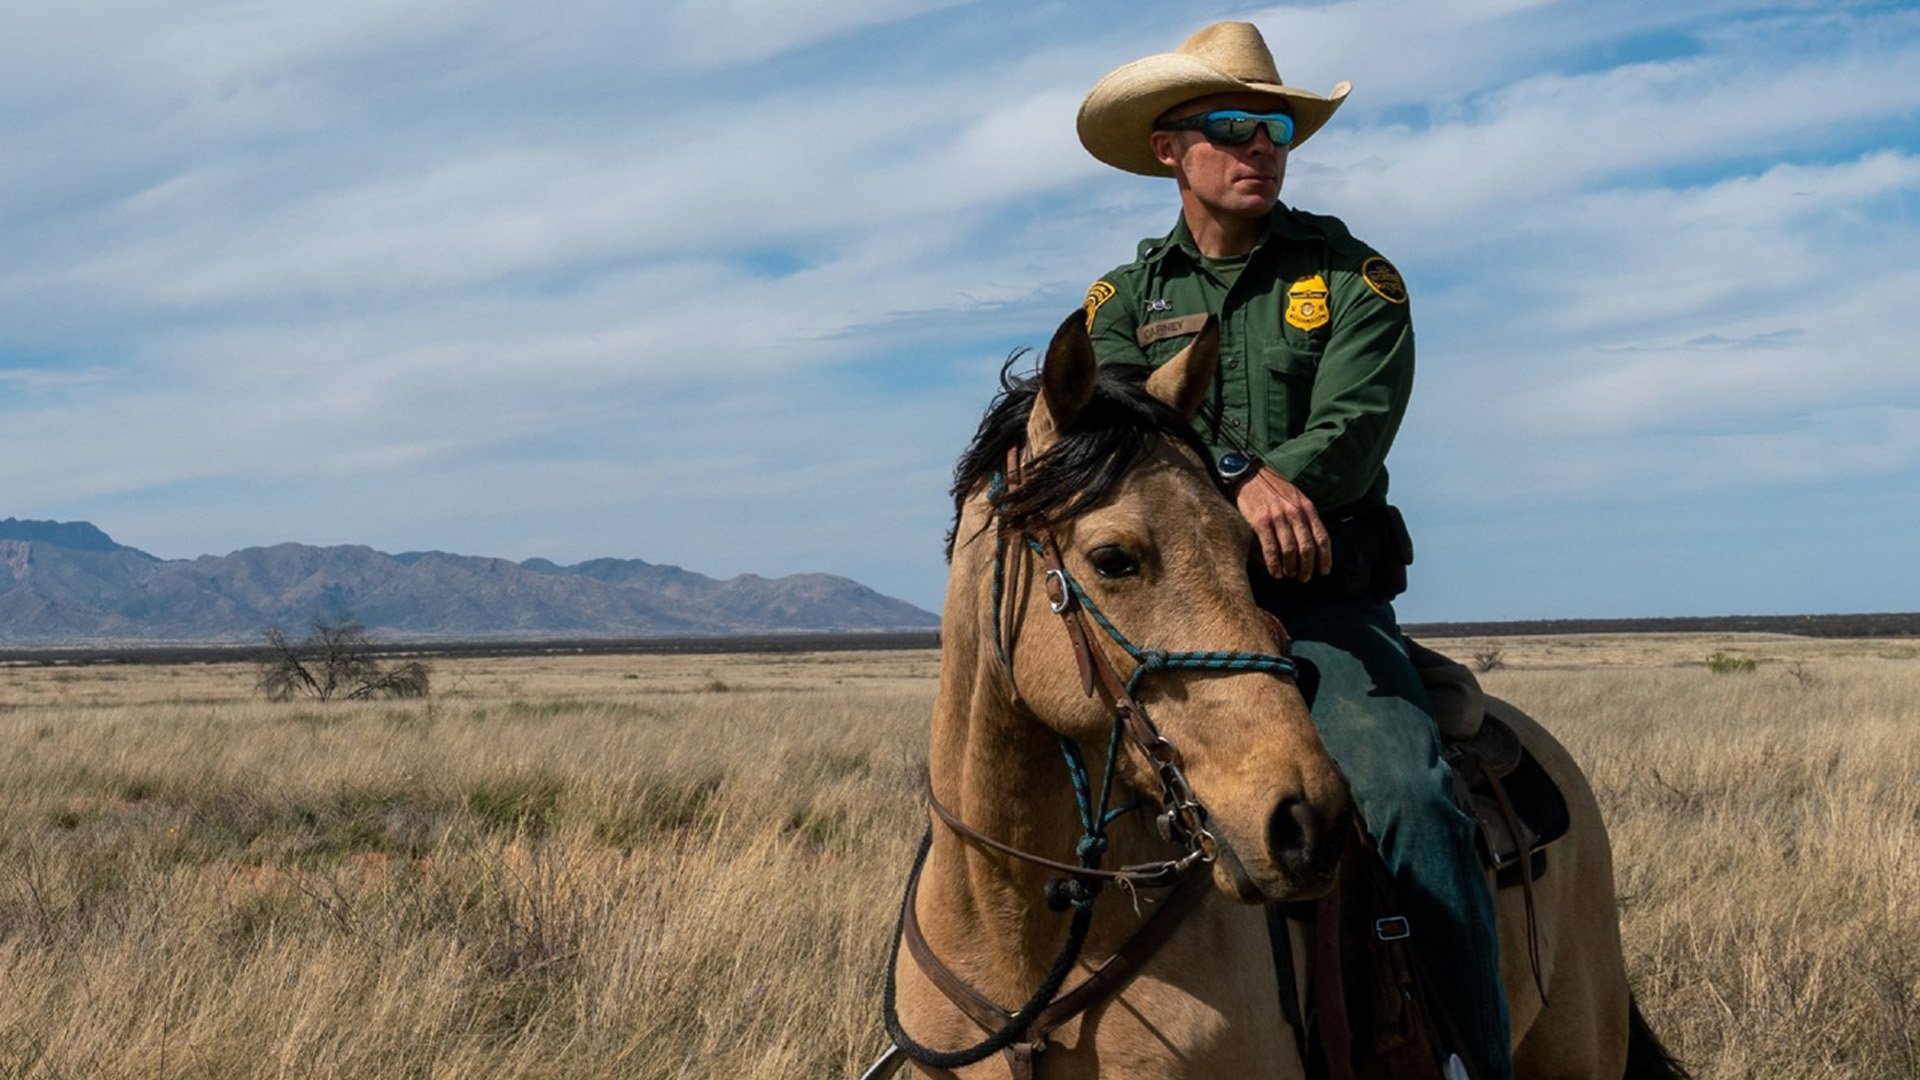 A US Border Patrol agent patrols the remote and rugged stretches of the Tucson Sector. On July 3, 2022, a Guatemalan migrant allegedly attacked and injured a fellow agent near the international boundary with Mexico. US Border Patrol photo.